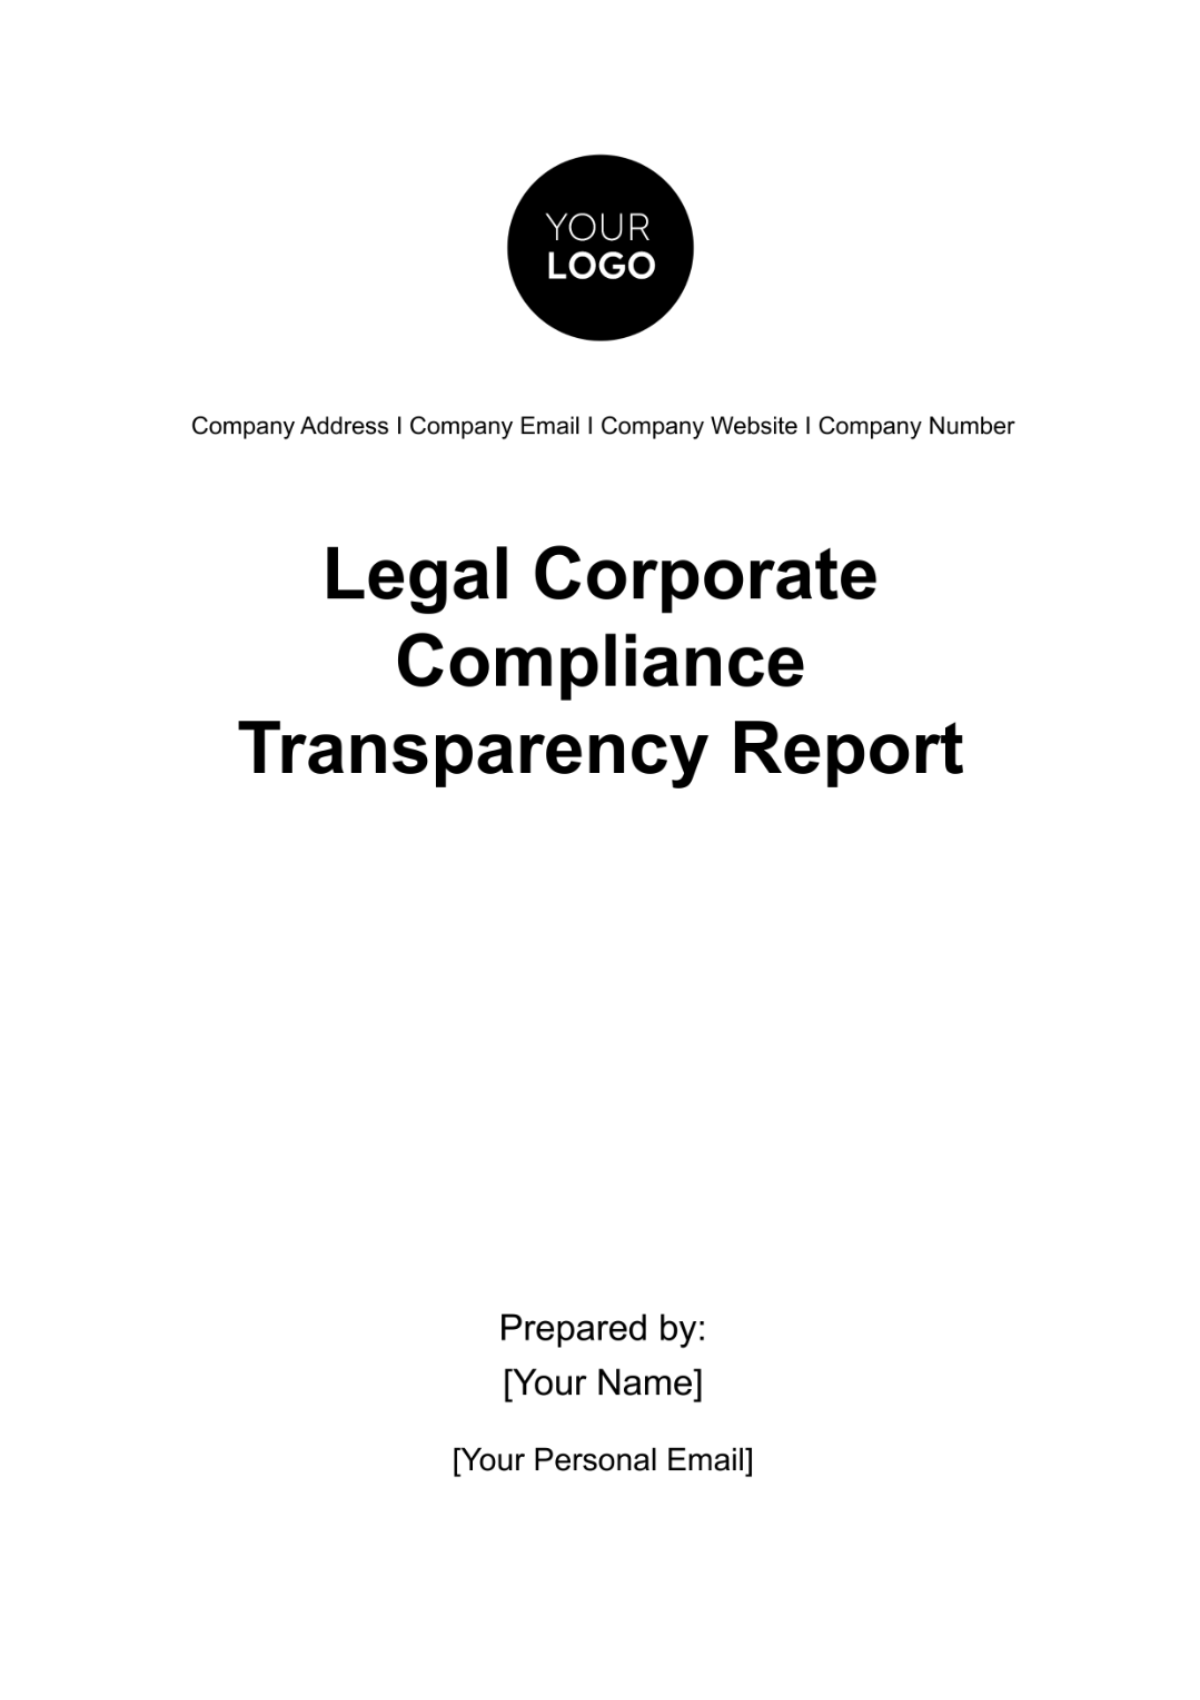 Legal Corporate Compliance Transparency Report Template